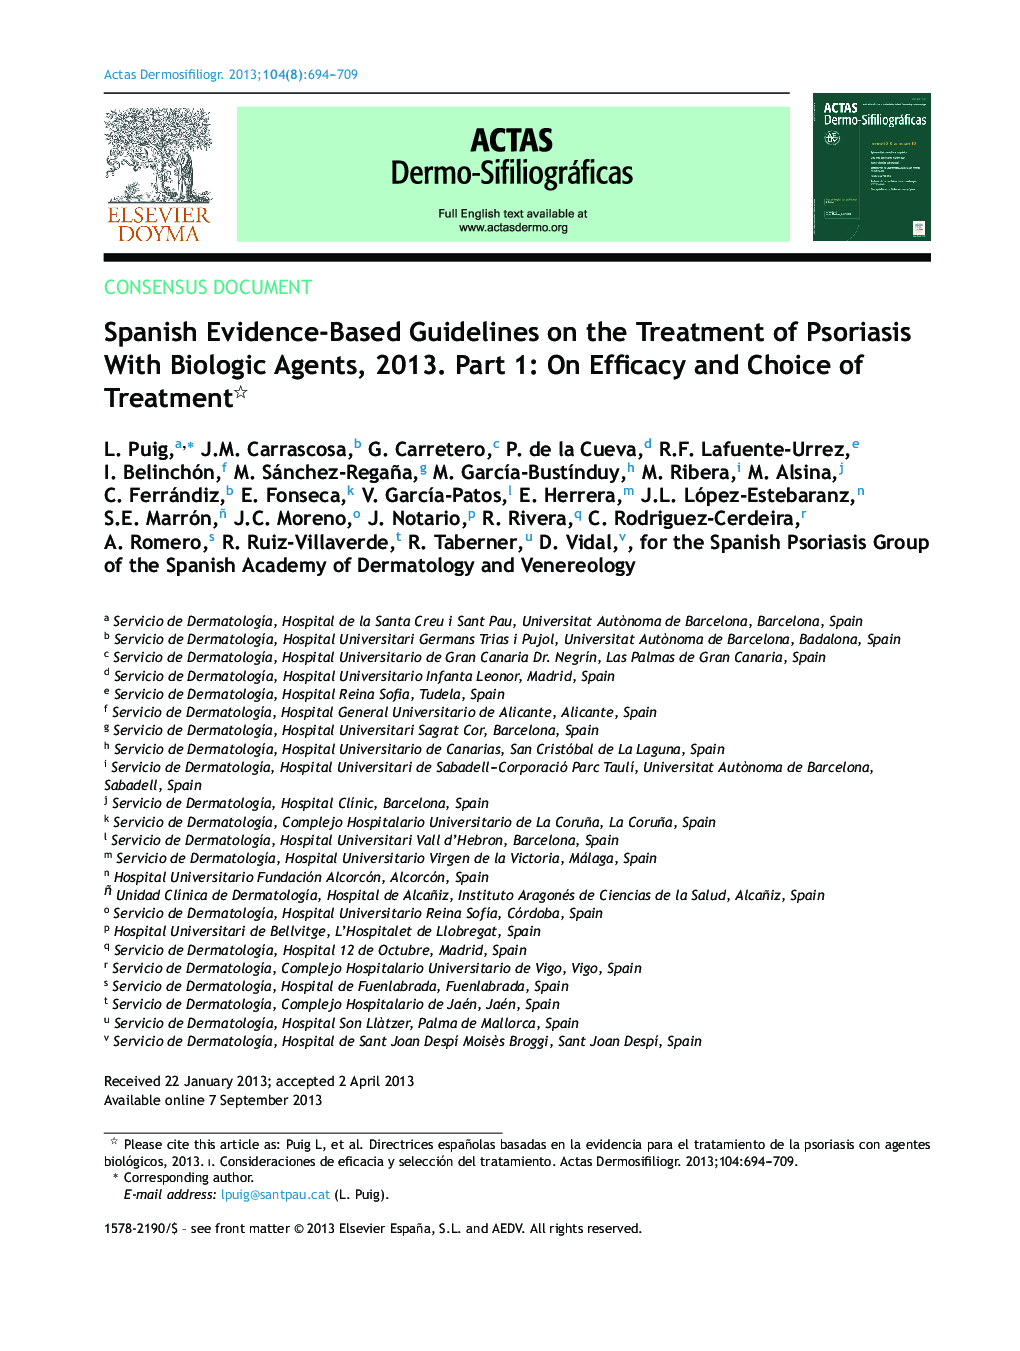 Spanish Evidence-Based Guidelines on the Treatment of Psoriasis With Biologic Agents, 2013. Part 1: On Efficacy and Choice of Treatment 